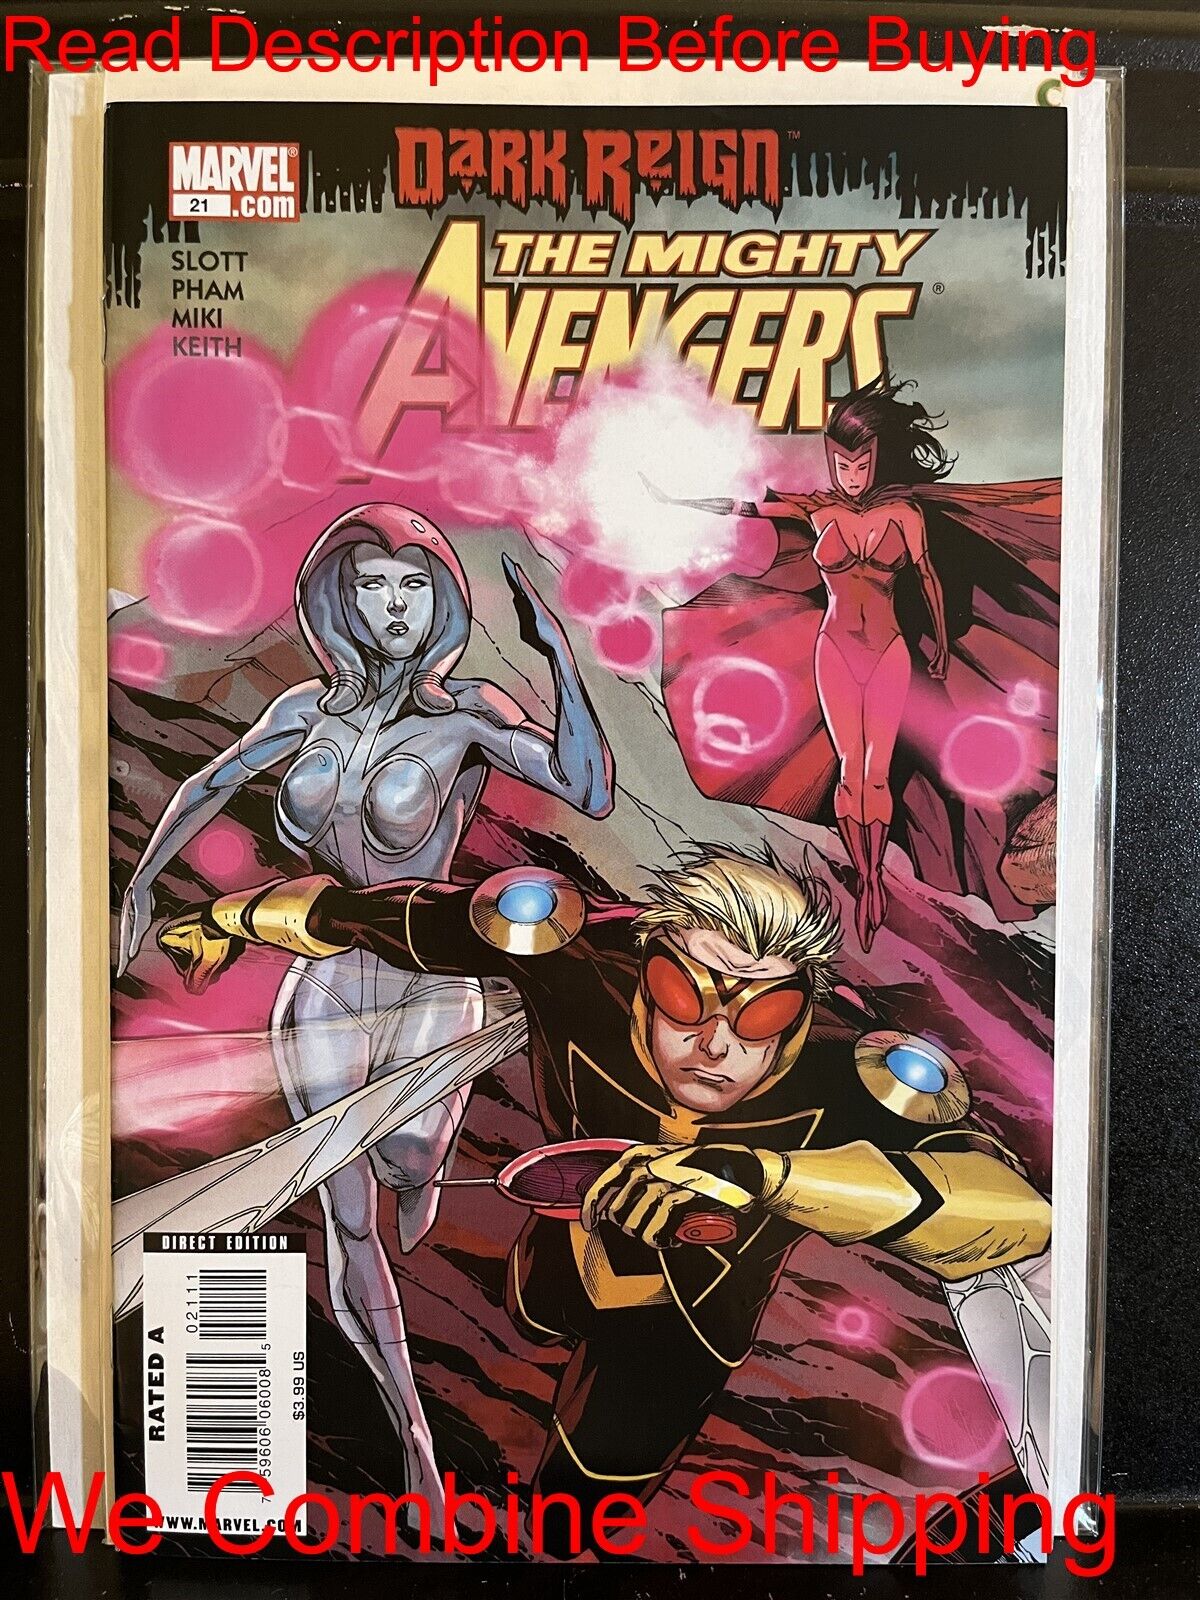 BARGAIN BOOKS ($5 MIN PURCHASE) Mighty Avengers #21 2009 Marvel We Combine Ship